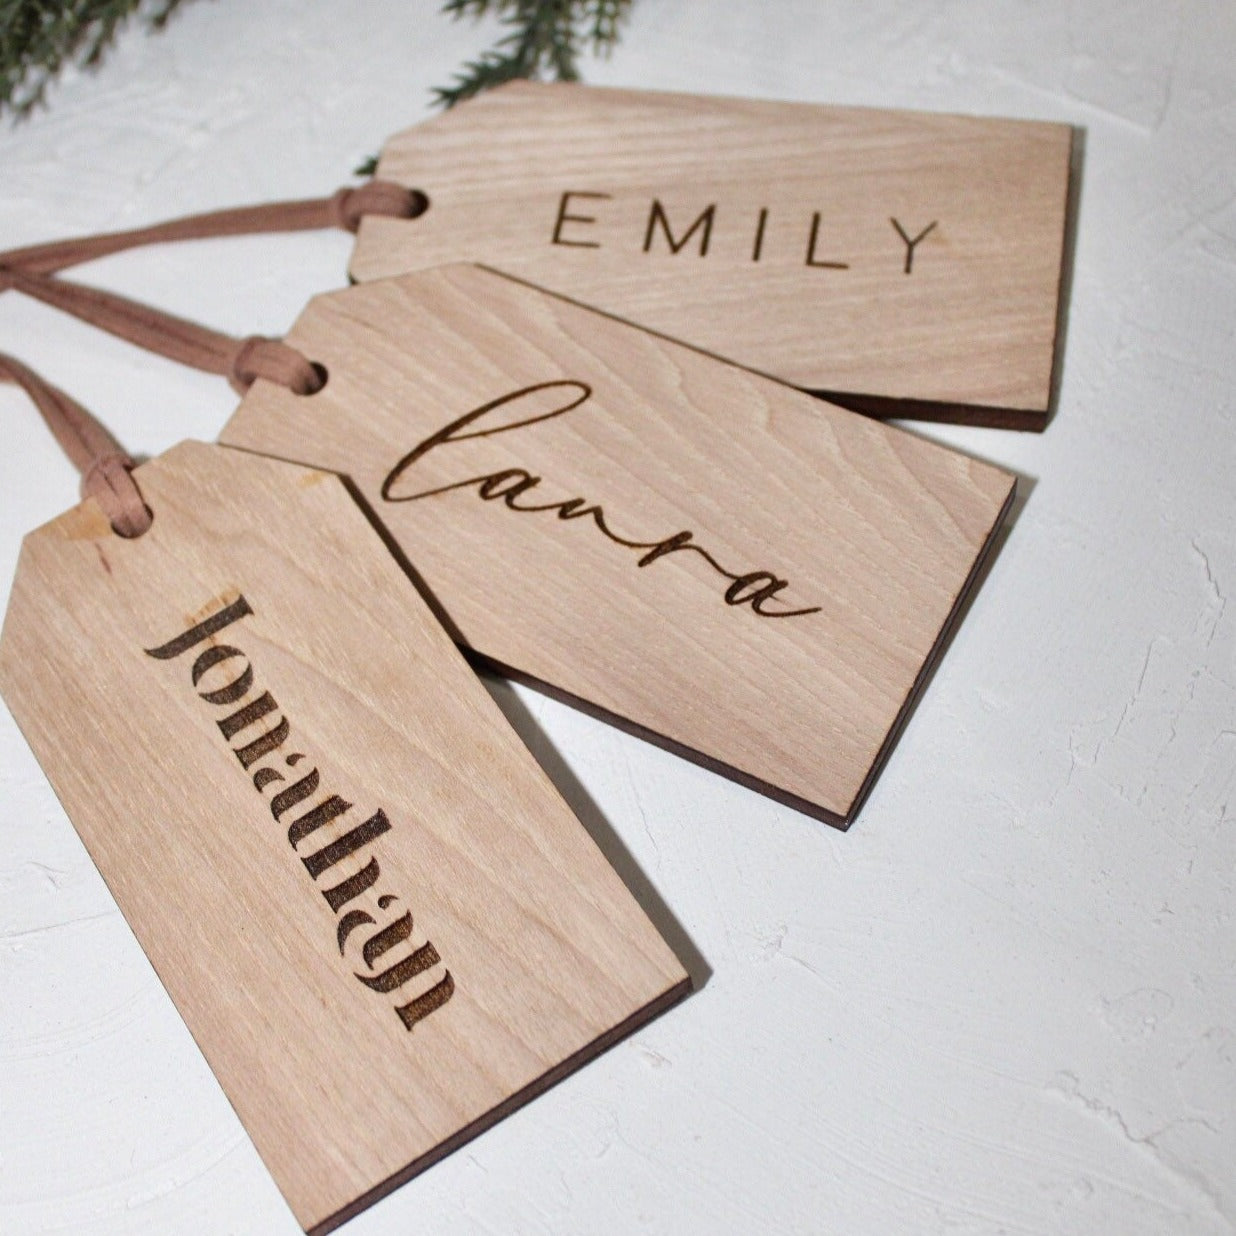 Christmas Stocking Tags in Acrylic and Wood, Custom Name Tags